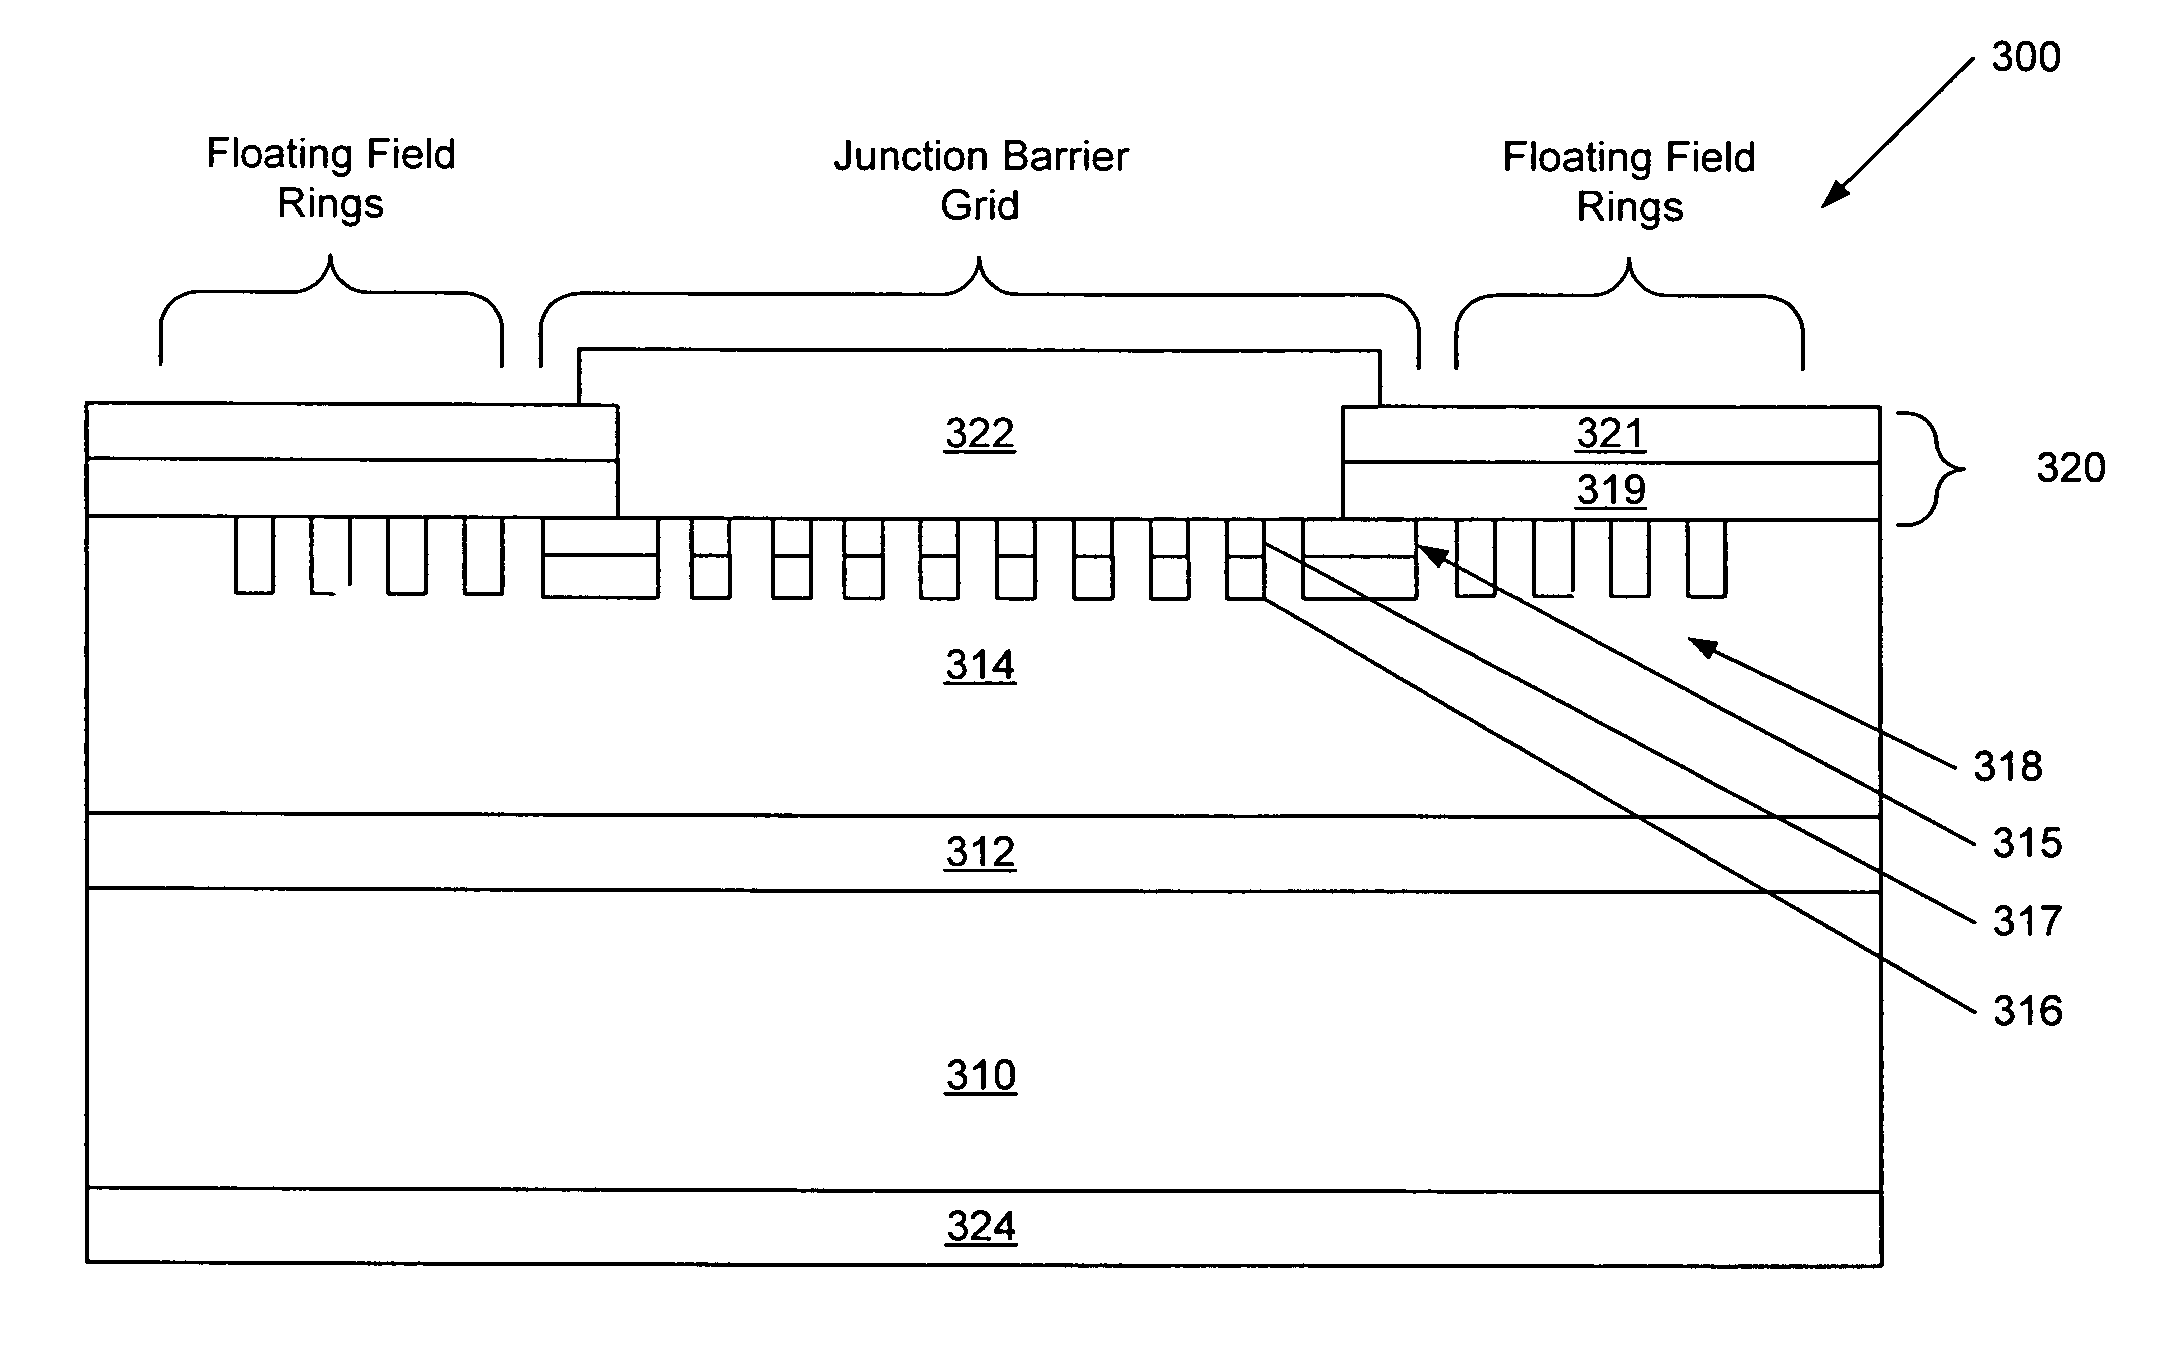 Silicon carbide junction barrier Schottky diodes with suppressed minority carrier injection